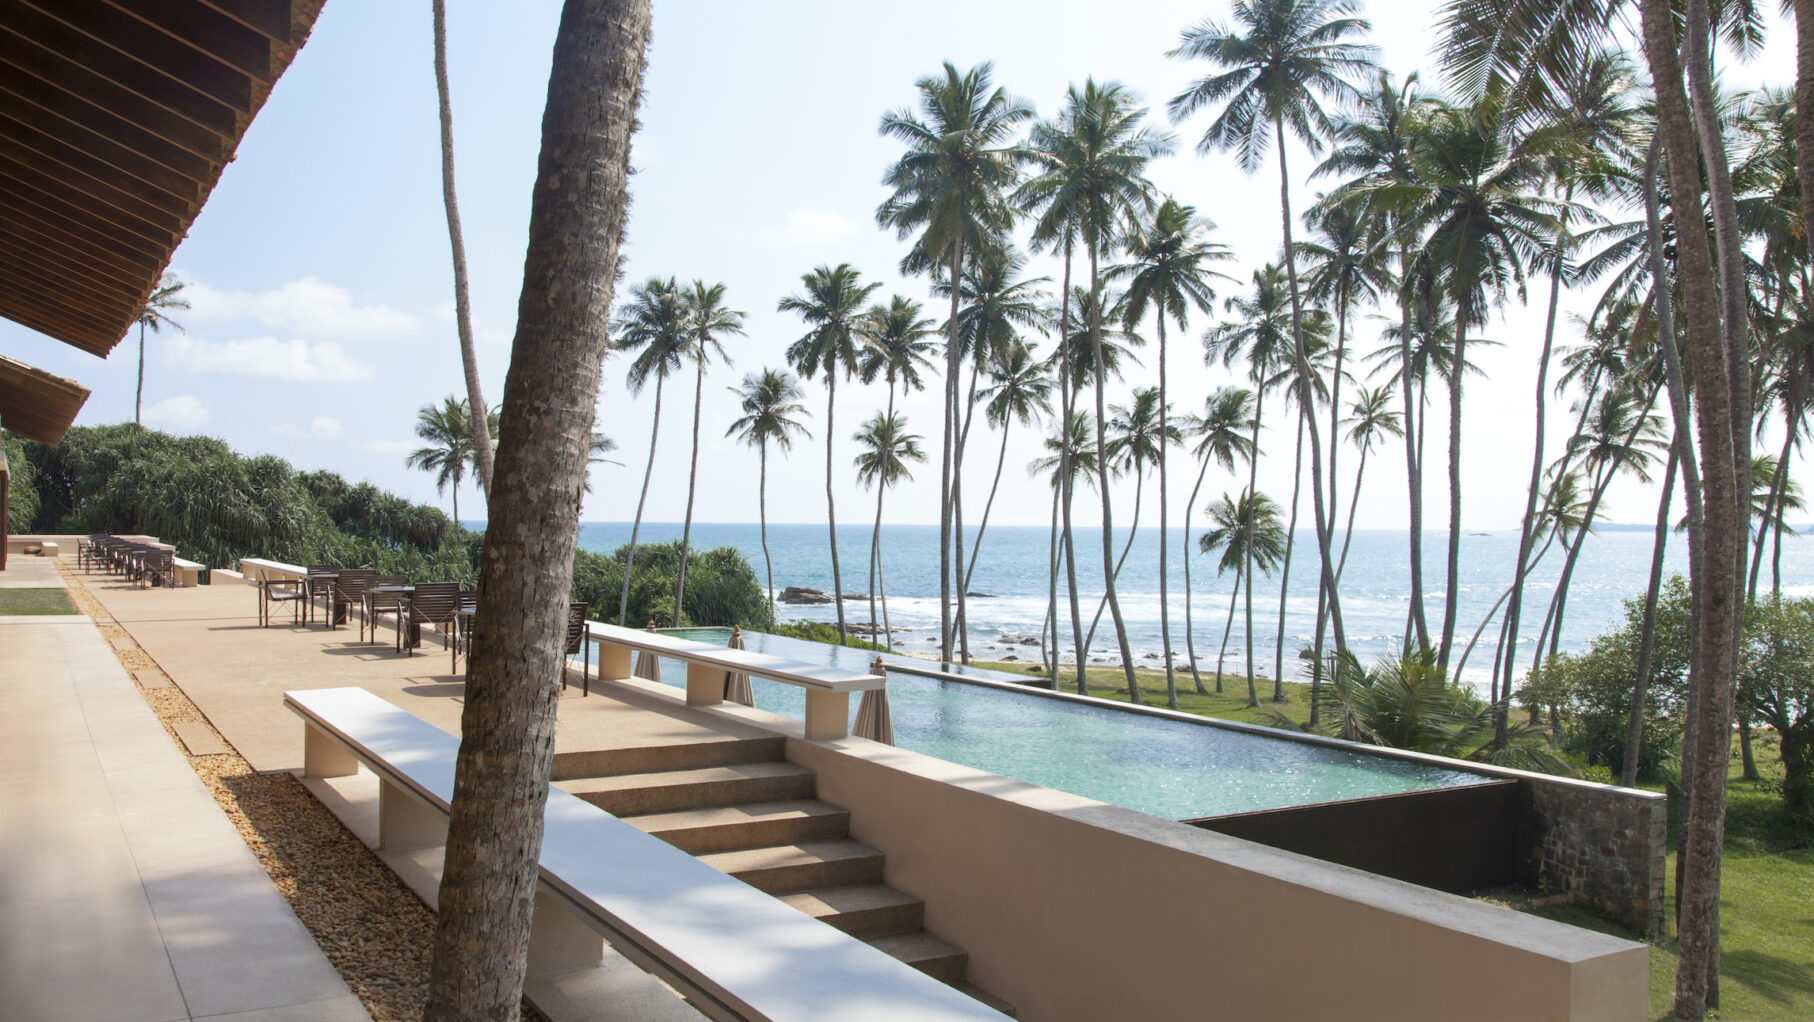 Swimming pool with a view, Amanwella, Sri Lanka as part of an air cruise